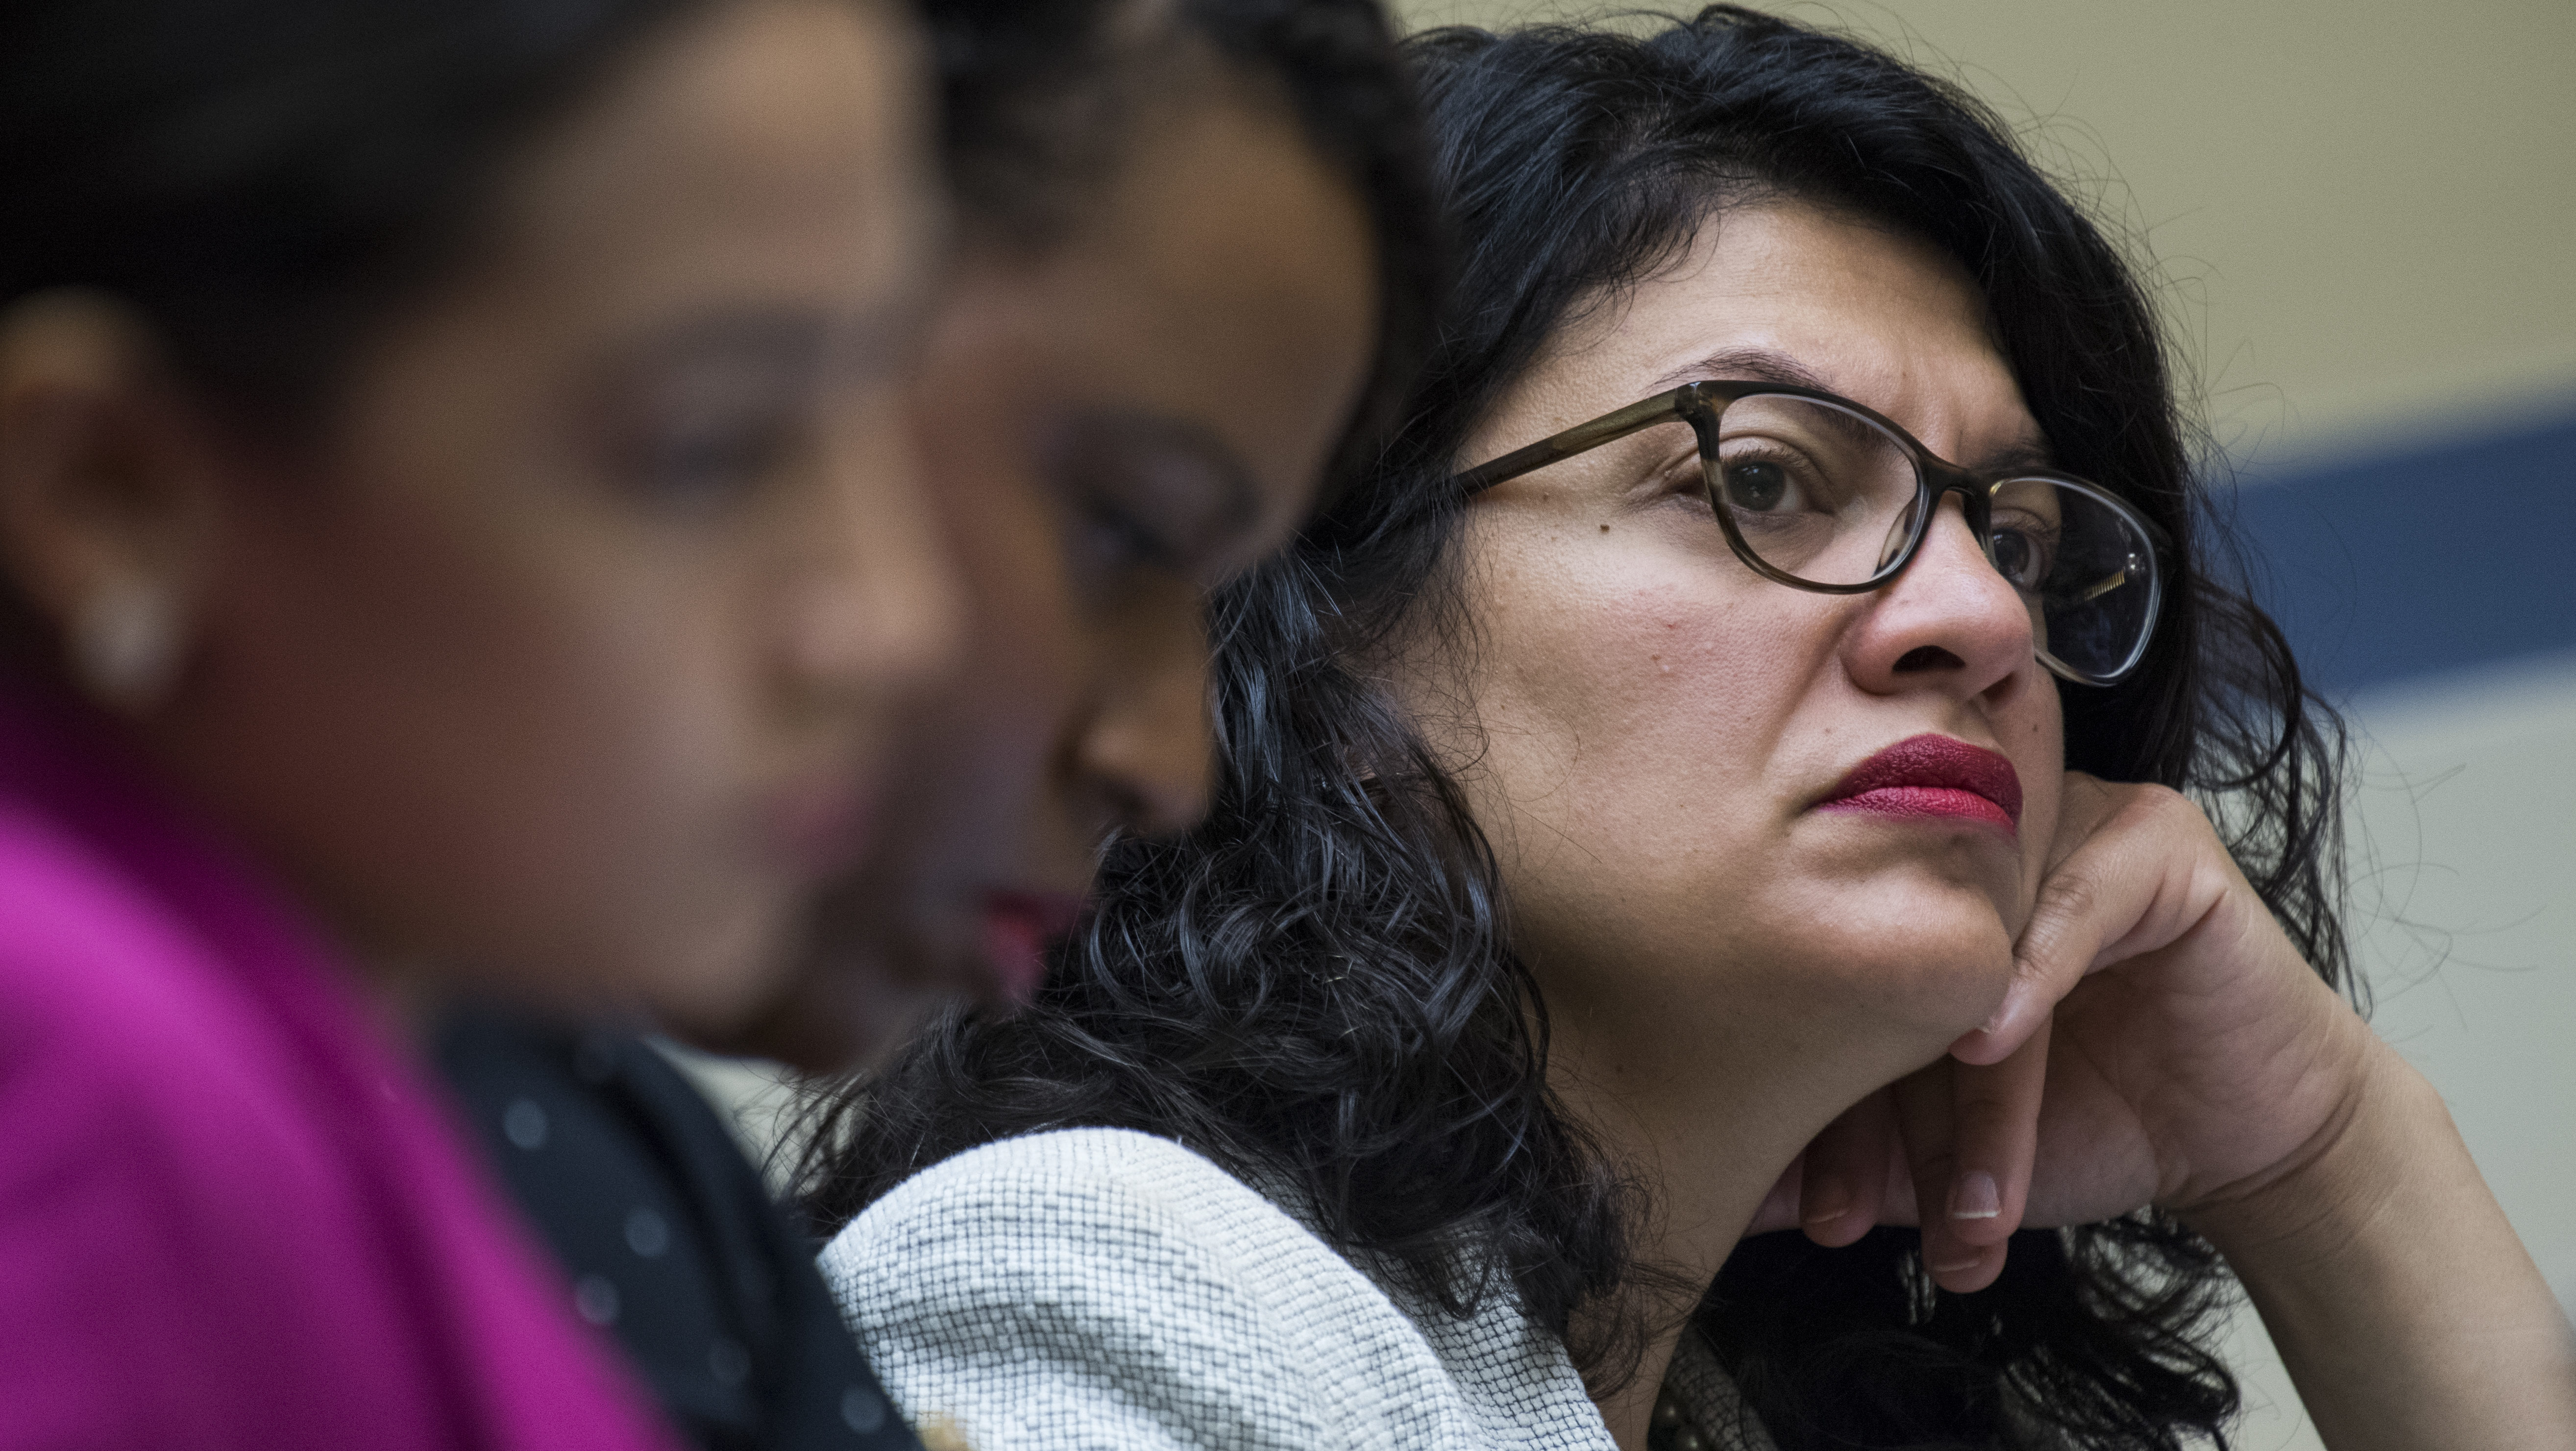 Reports: Israel Bans BDS-Supporting US Congresswomen Tlaib, Omar